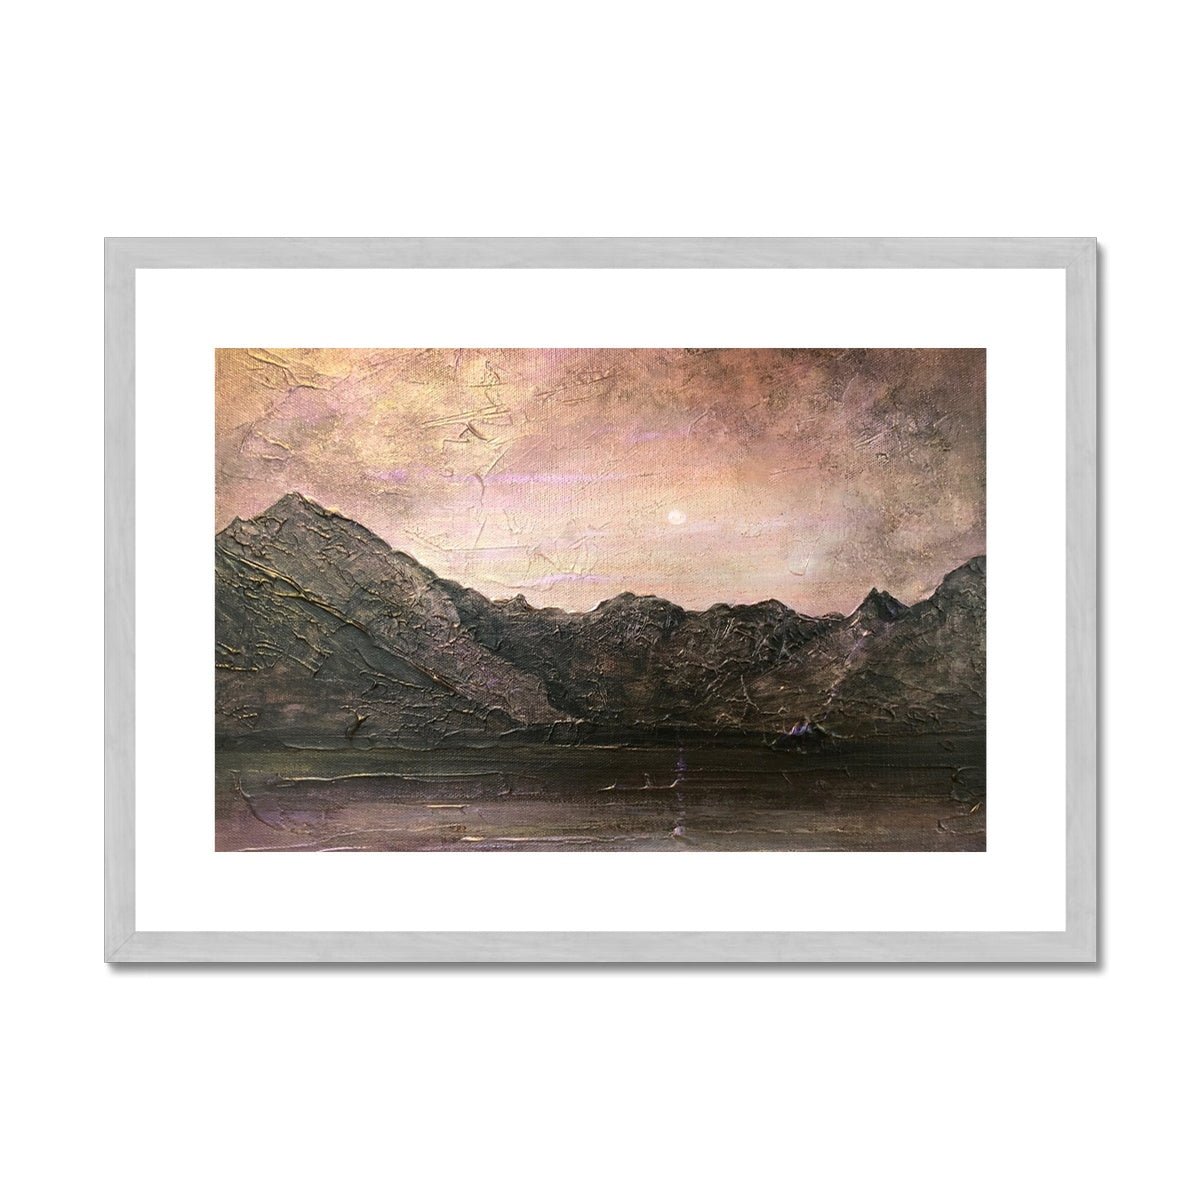 Dubh Ridge Moonlight Skye Painting | Antique Framed & Mounted Prints From Scotland-Antique Framed & Mounted Prints-Skye Art Gallery-A2 Landscape-Silver Frame-Paintings, Prints, Homeware, Art Gifts From Scotland By Scottish Artist Kevin Hunter